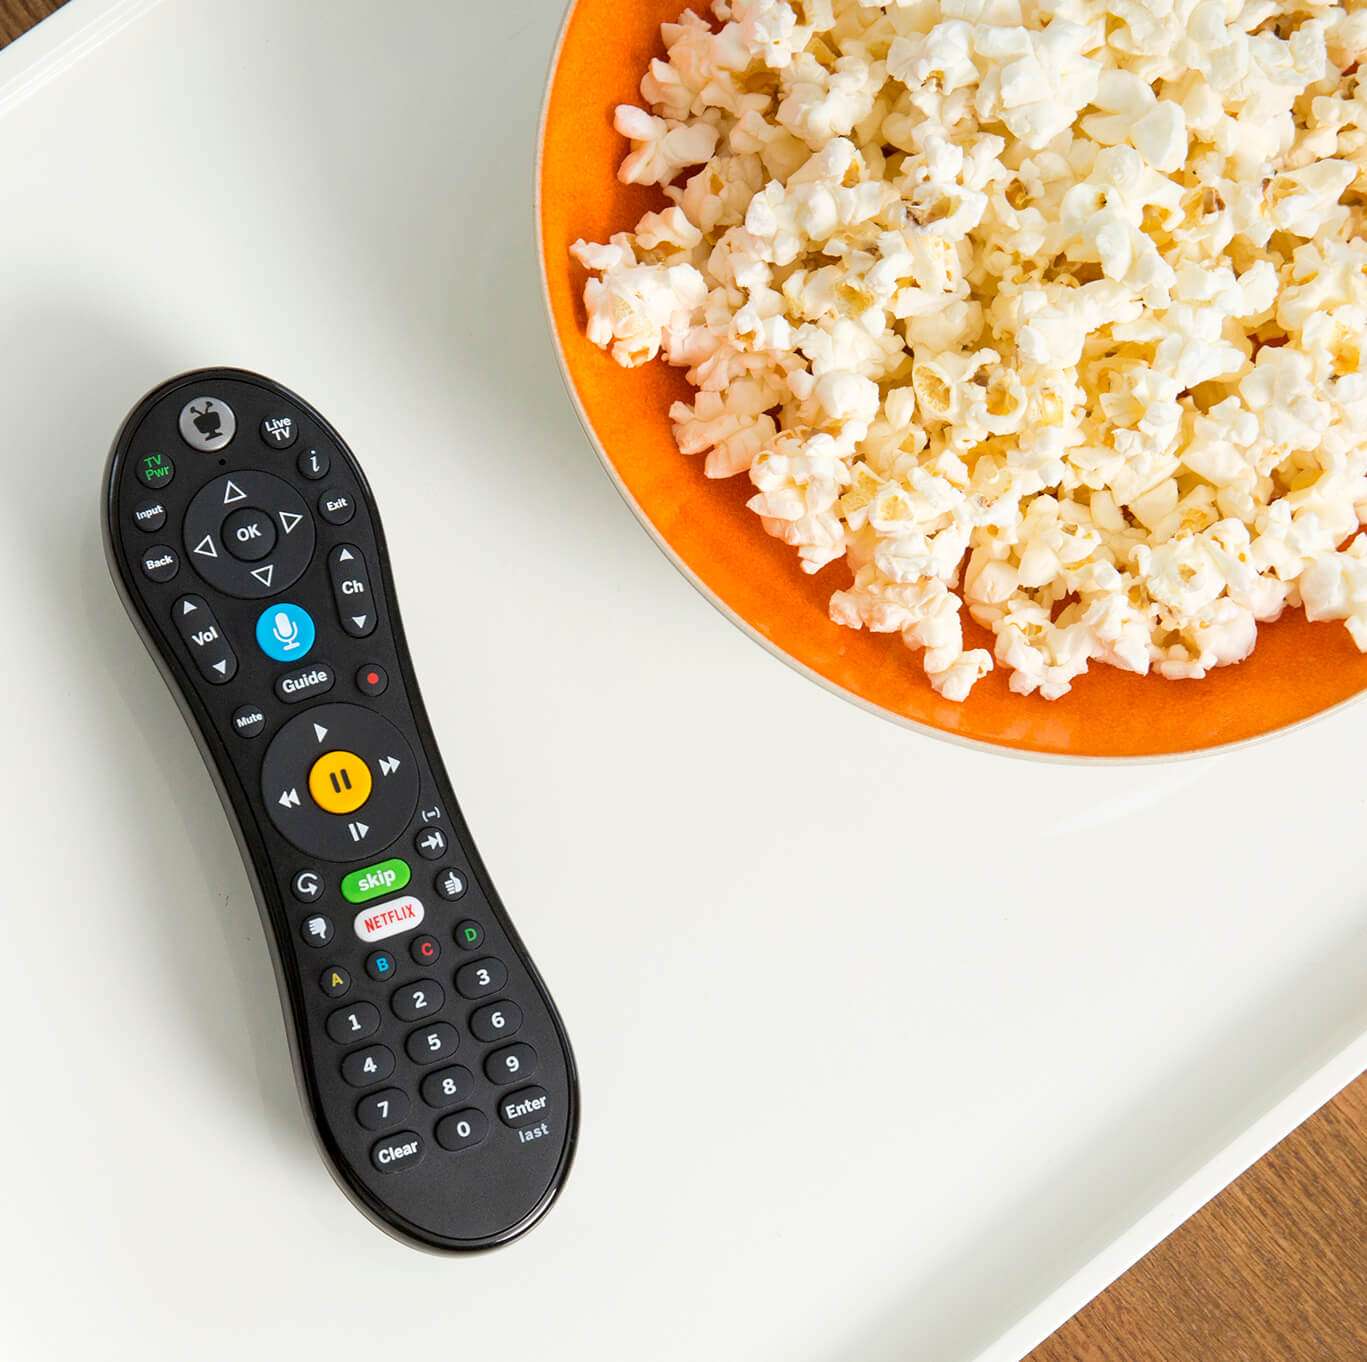 Remote and bowl of popcorn